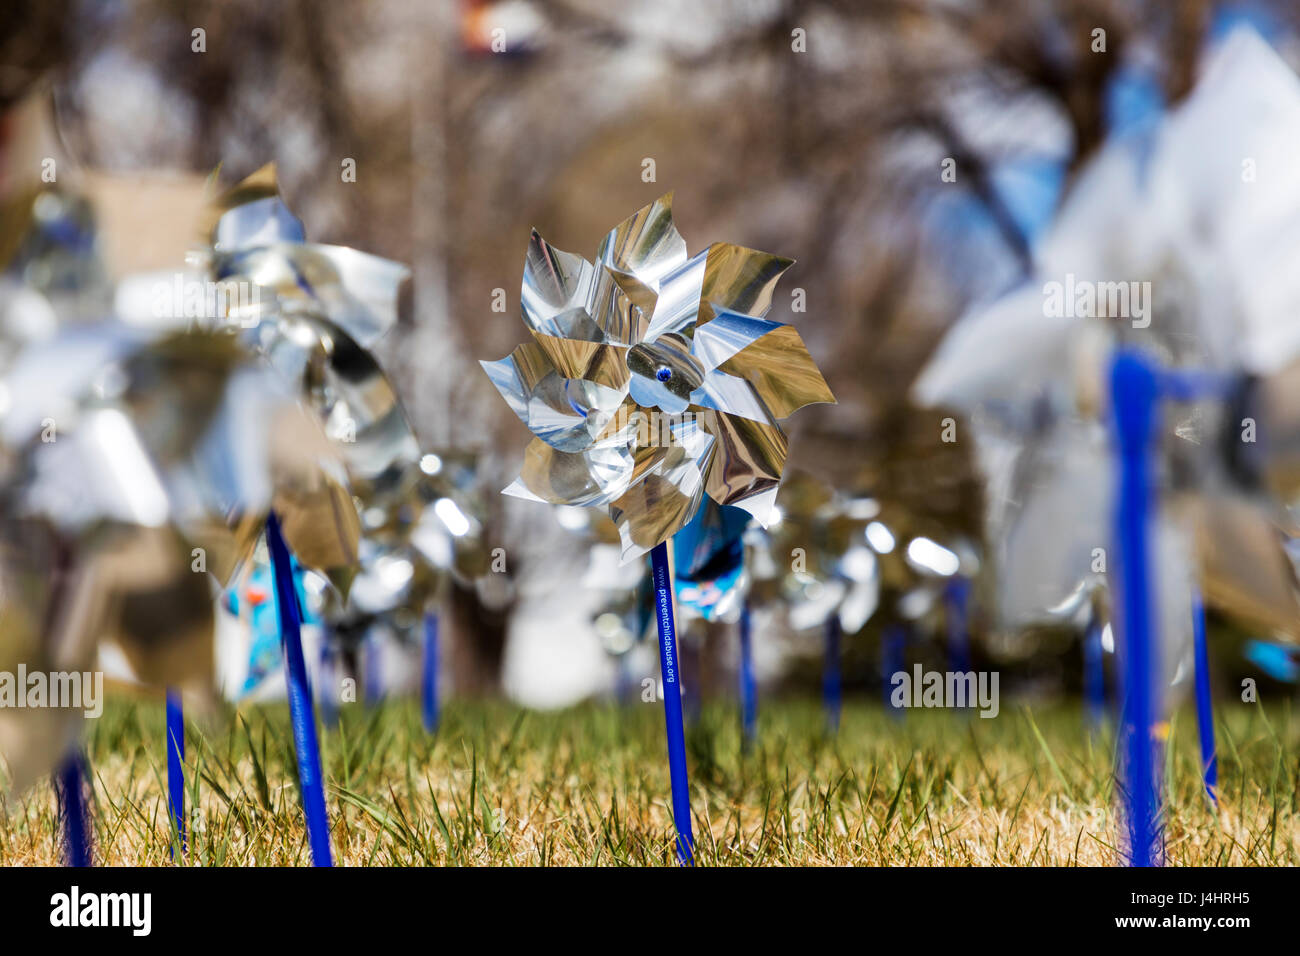 Pinwheels for Prevention, symbols for Prevention Against Child Abuse month, central Colorado, USA Stock Photo